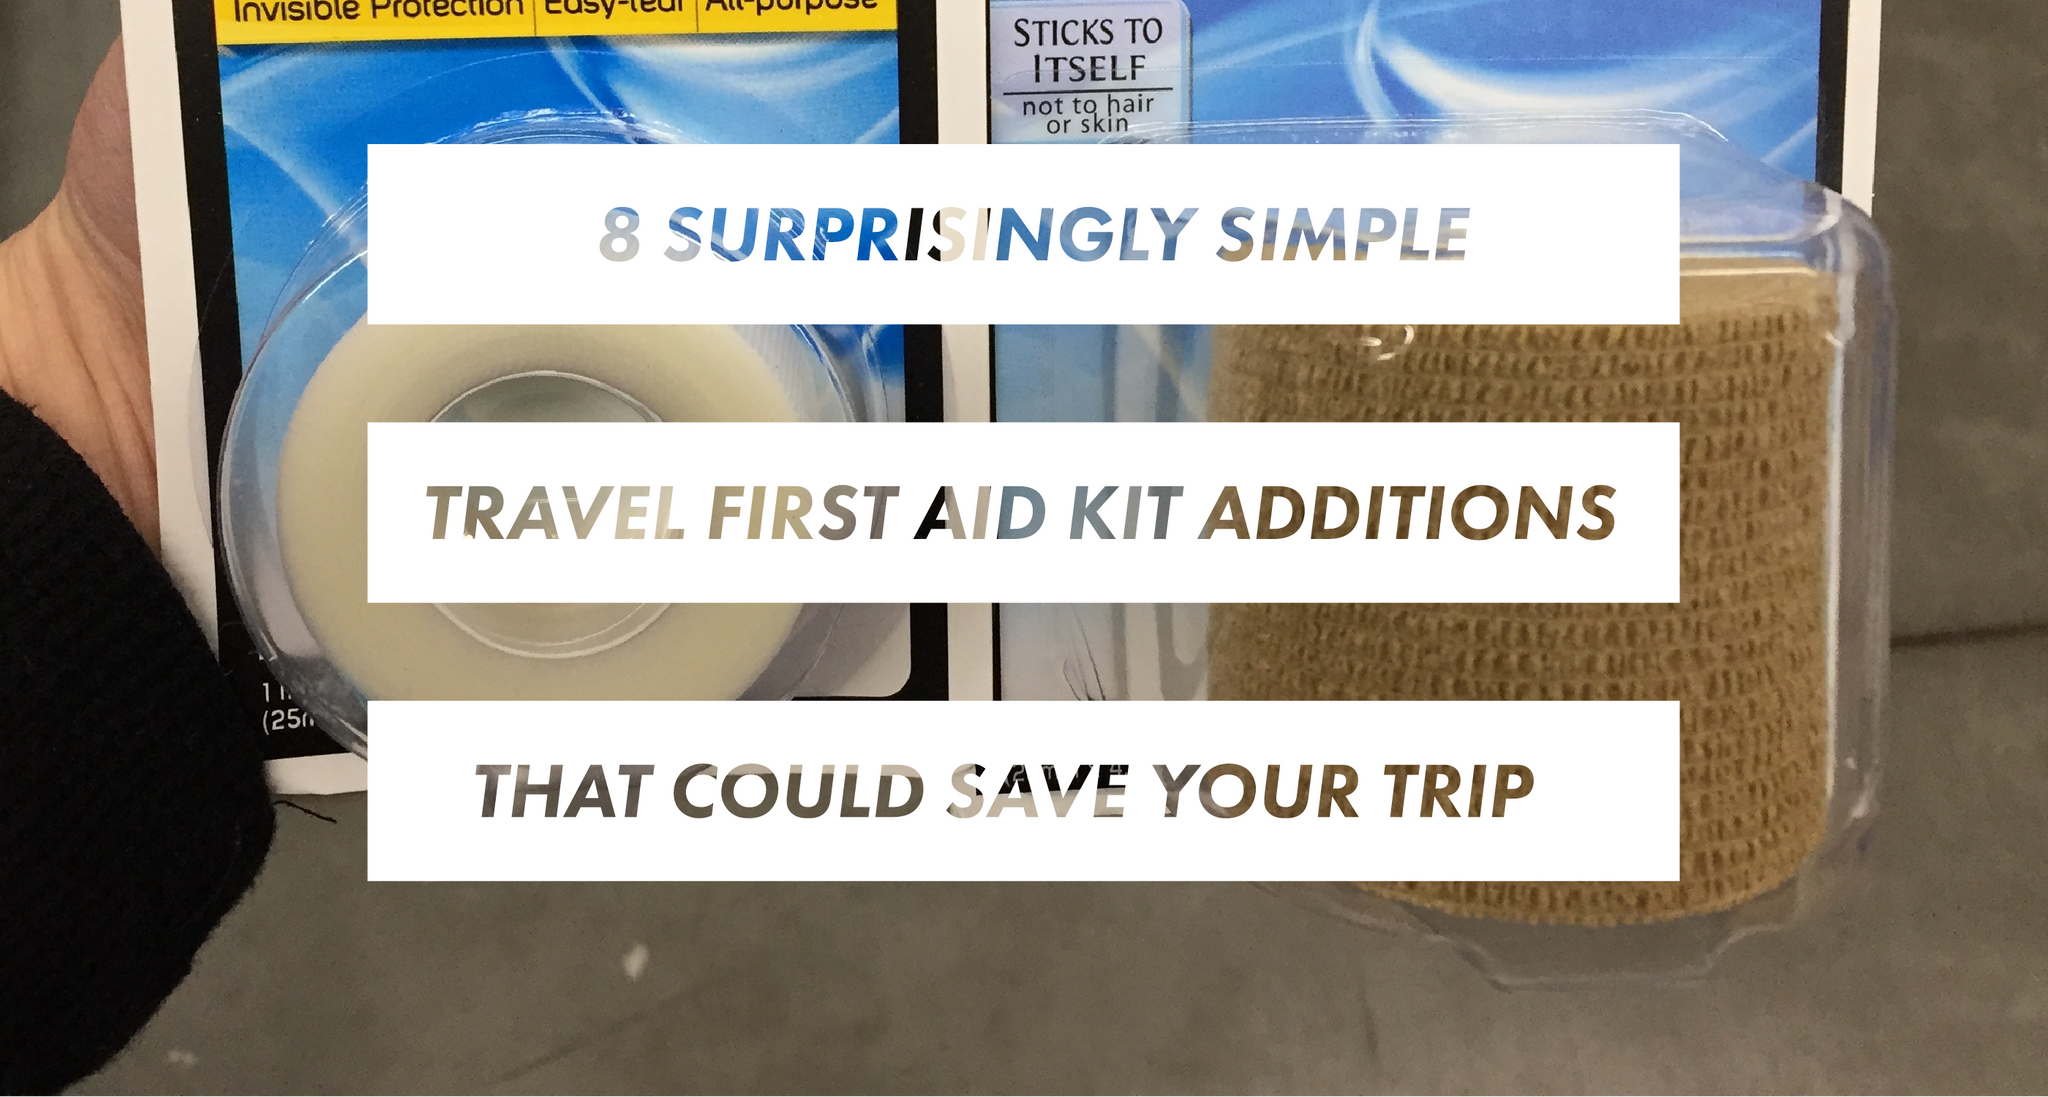 8 Surprisingly Simple Travel First Aid Kit Additions That Could Save Your Trip